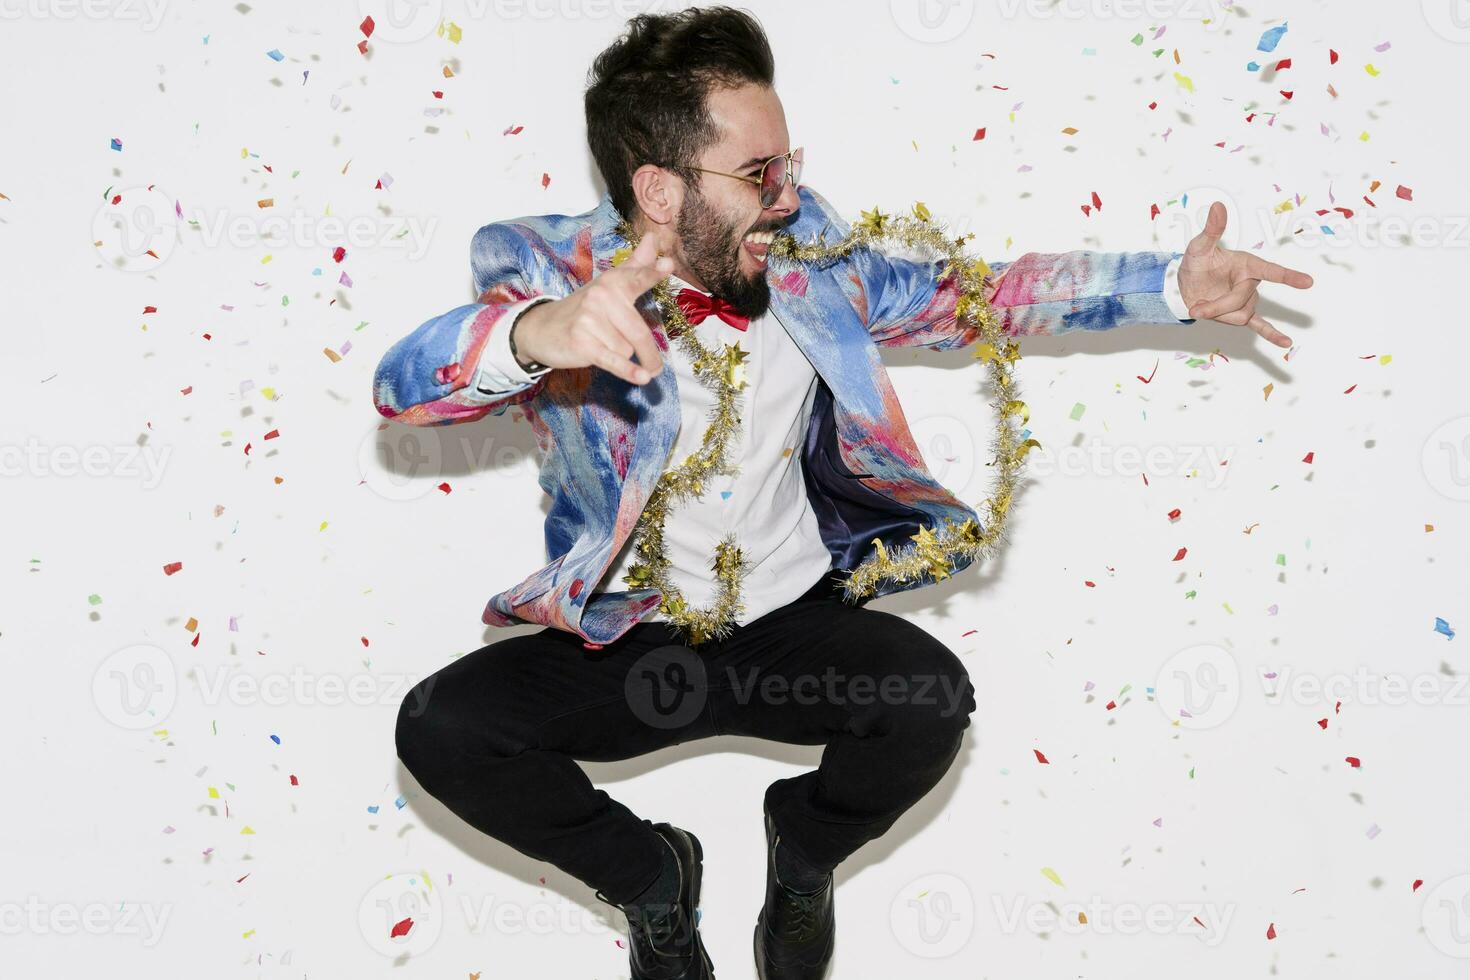 Stylish man wearing a colorful suit and sunglasses celebrating a party and jumping photo